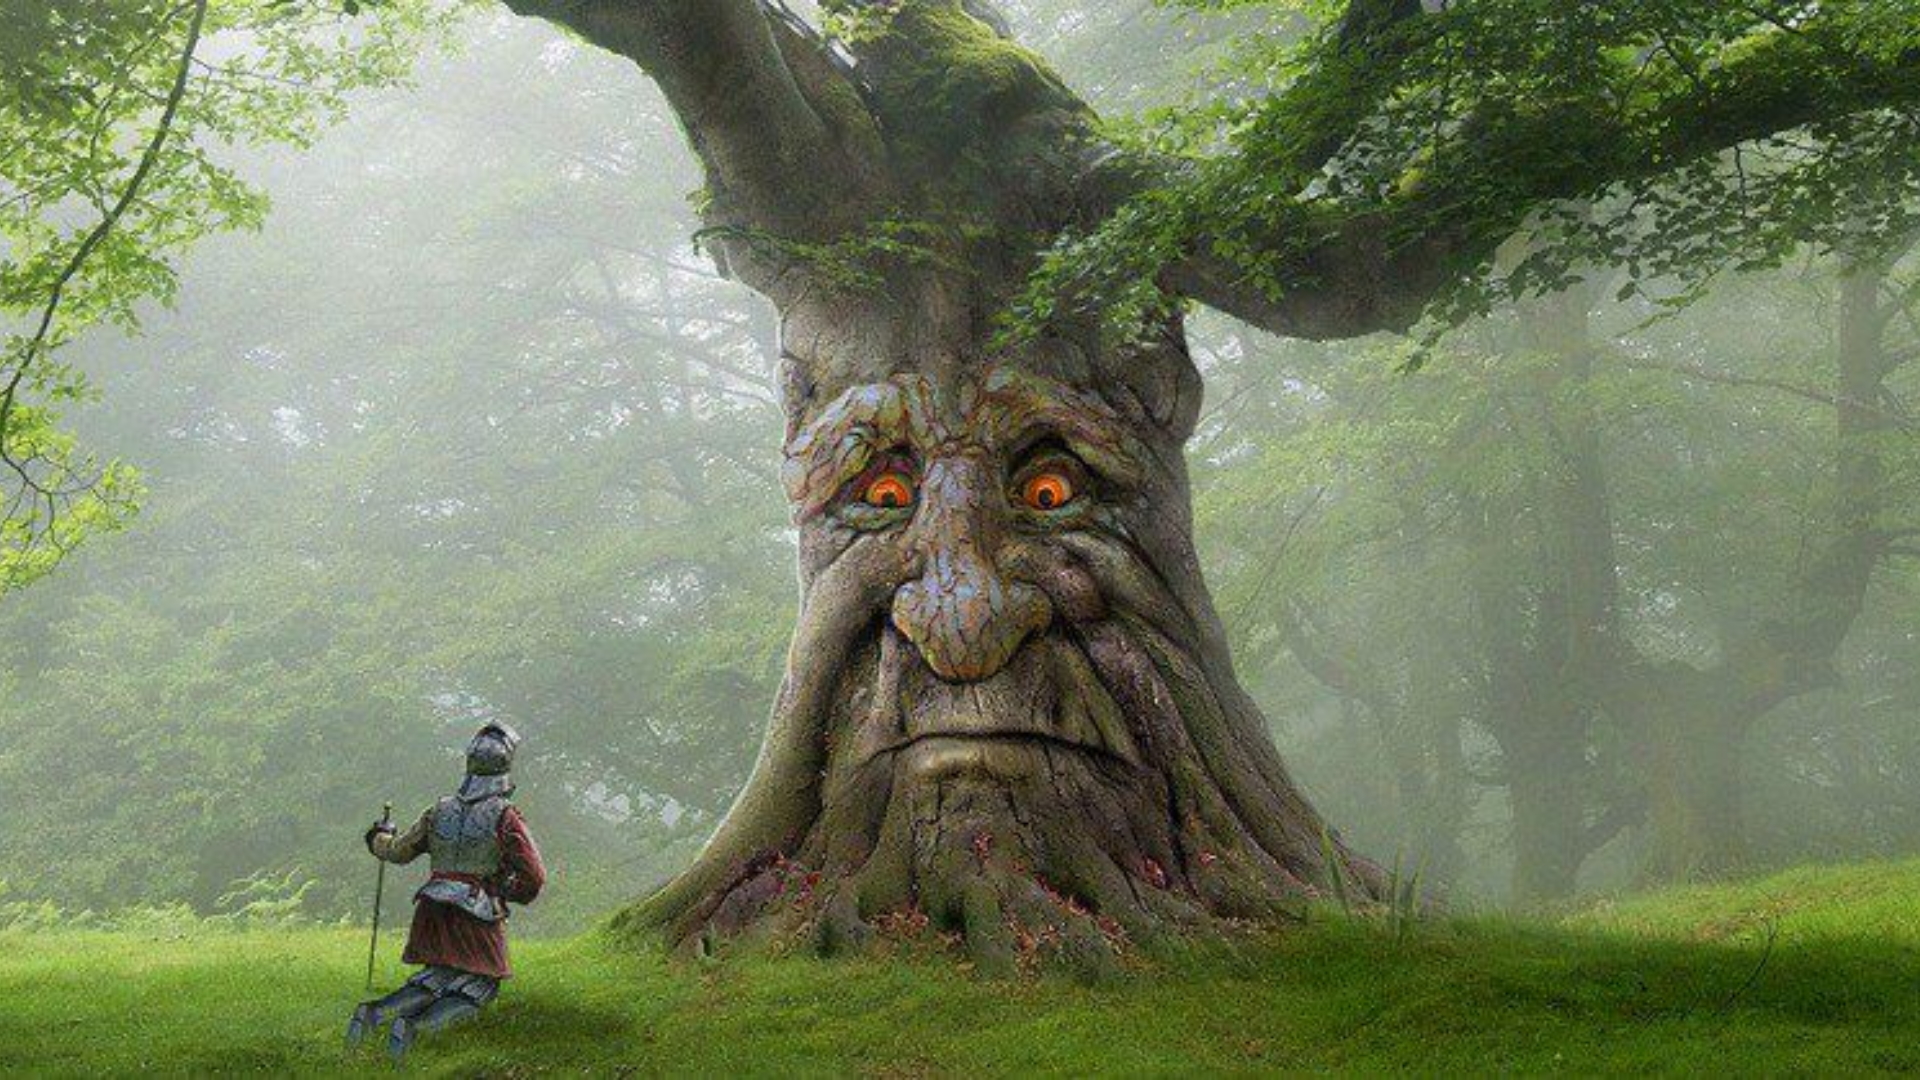 IF YOU ARE OVER 25 YOU MUST TRY THIS GAME - Mystical Wise Tree by loaftie